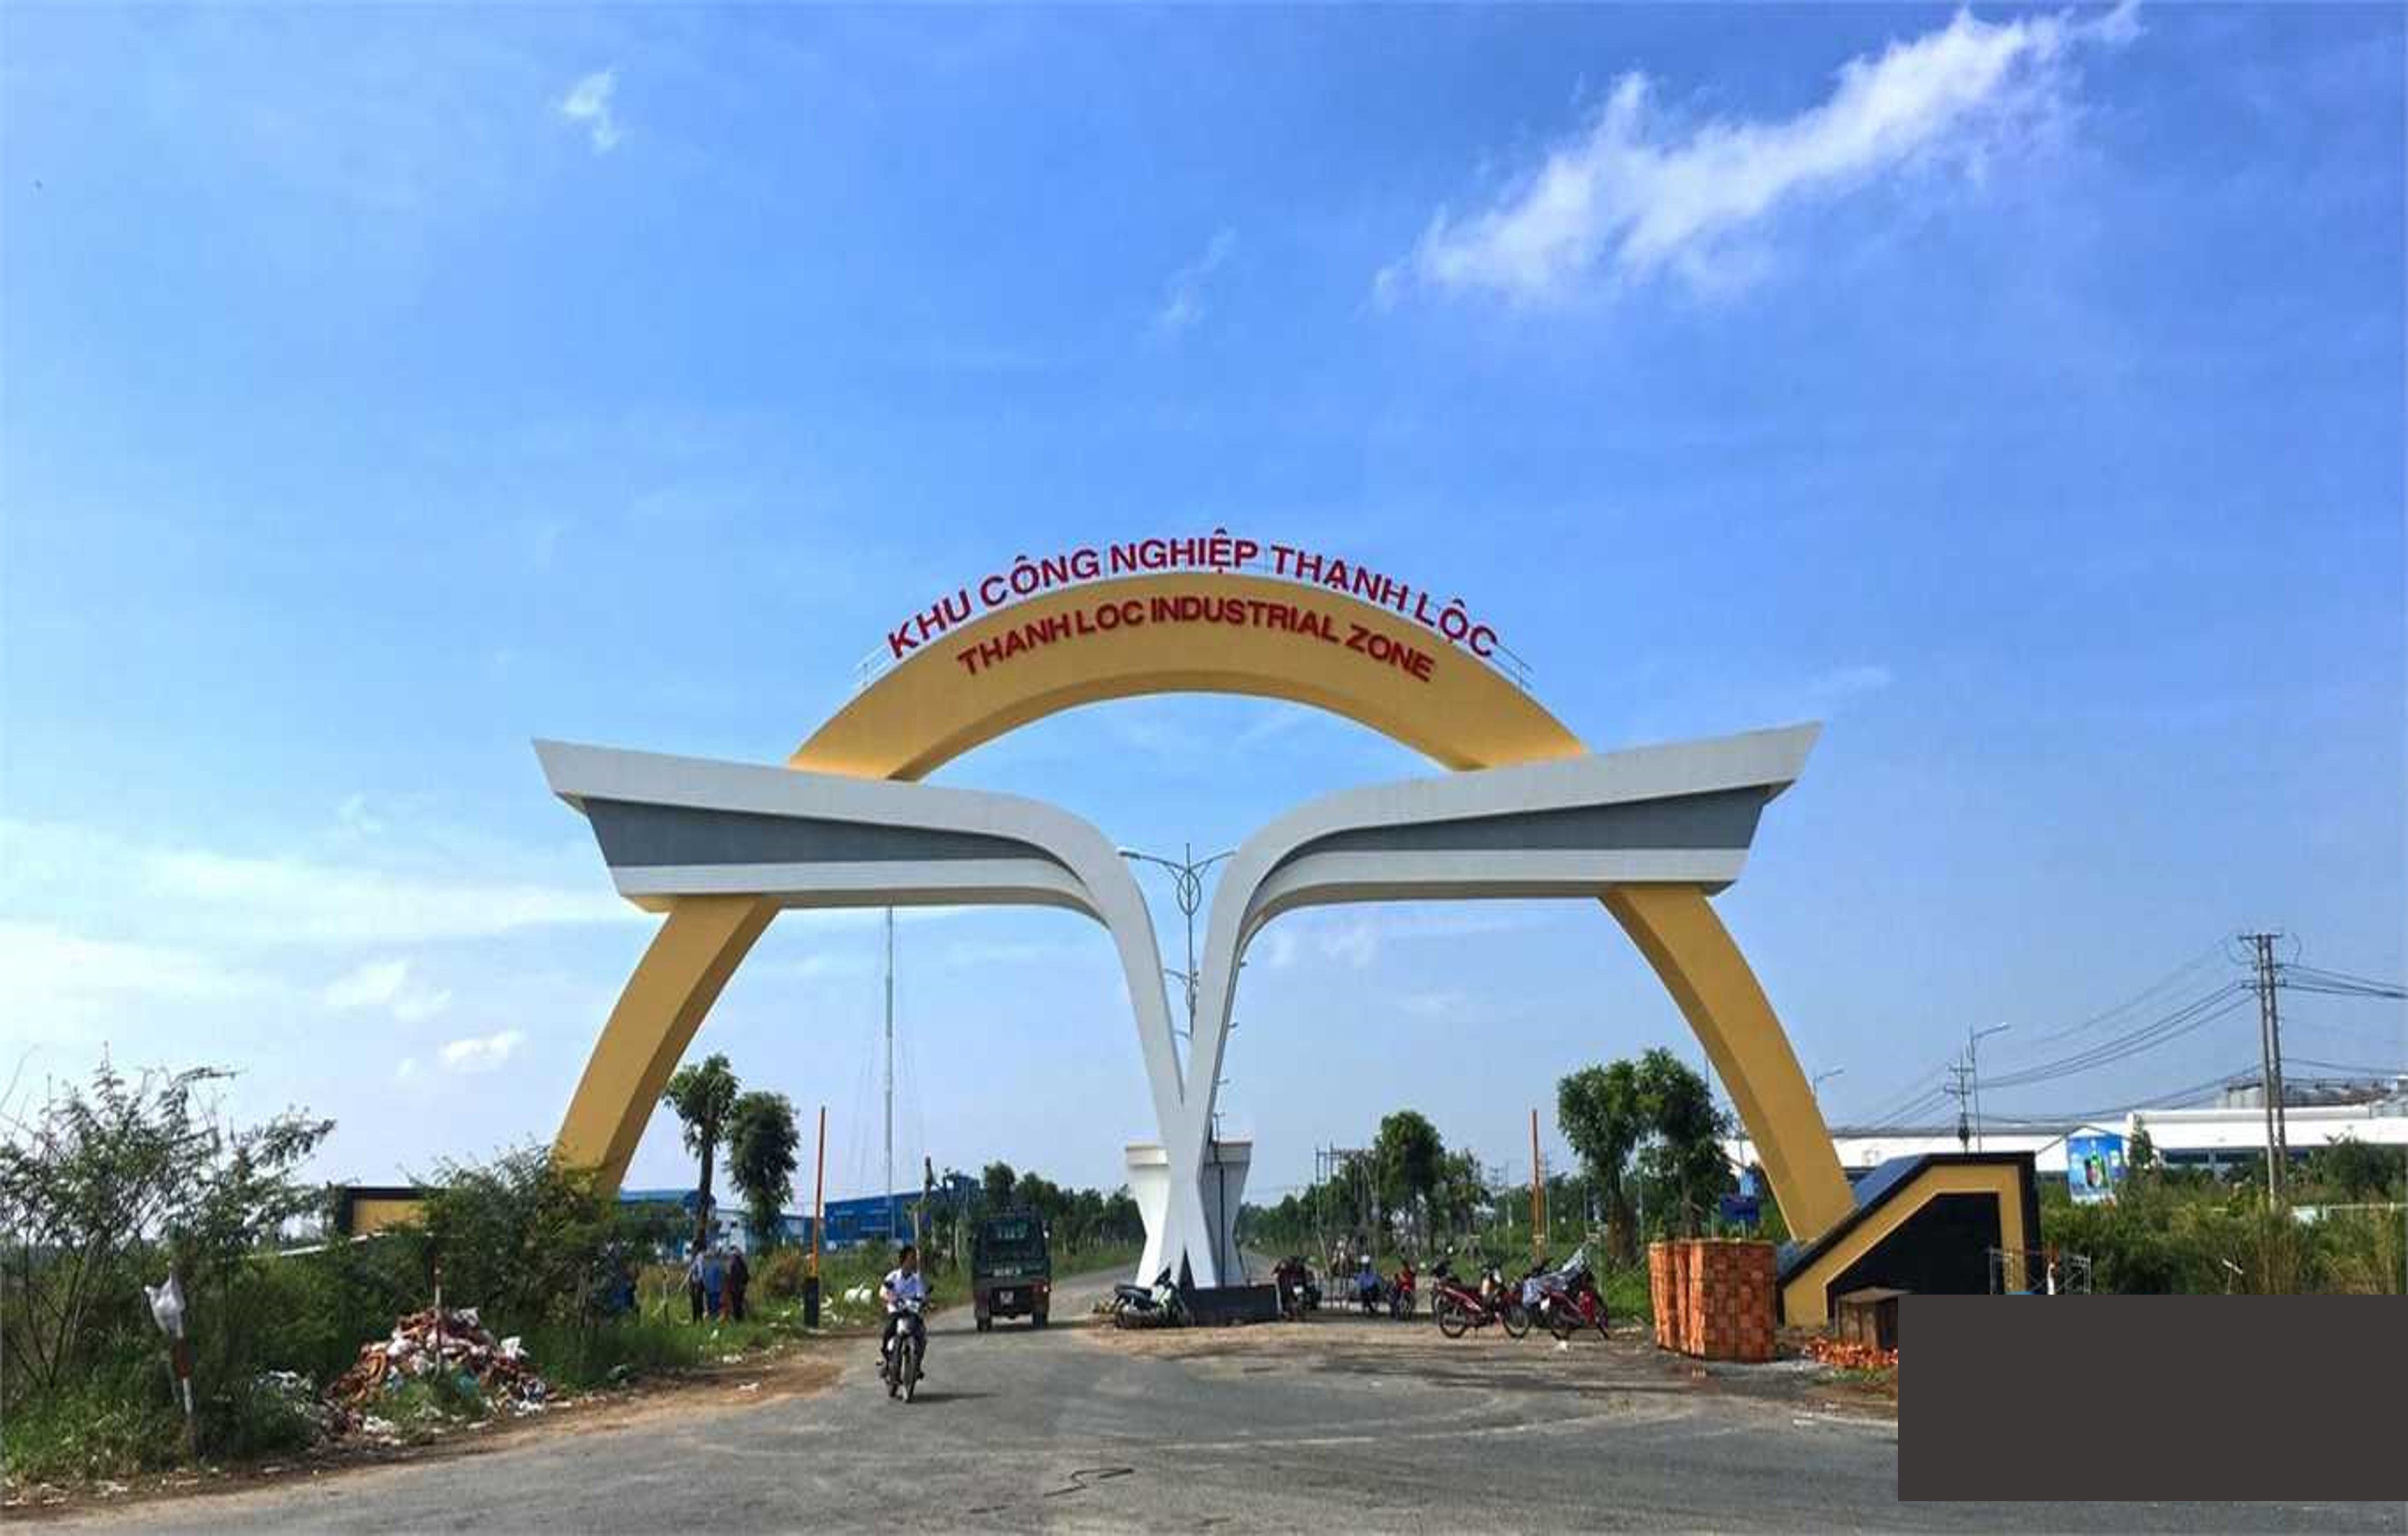 Thanh Loc Industrial Park